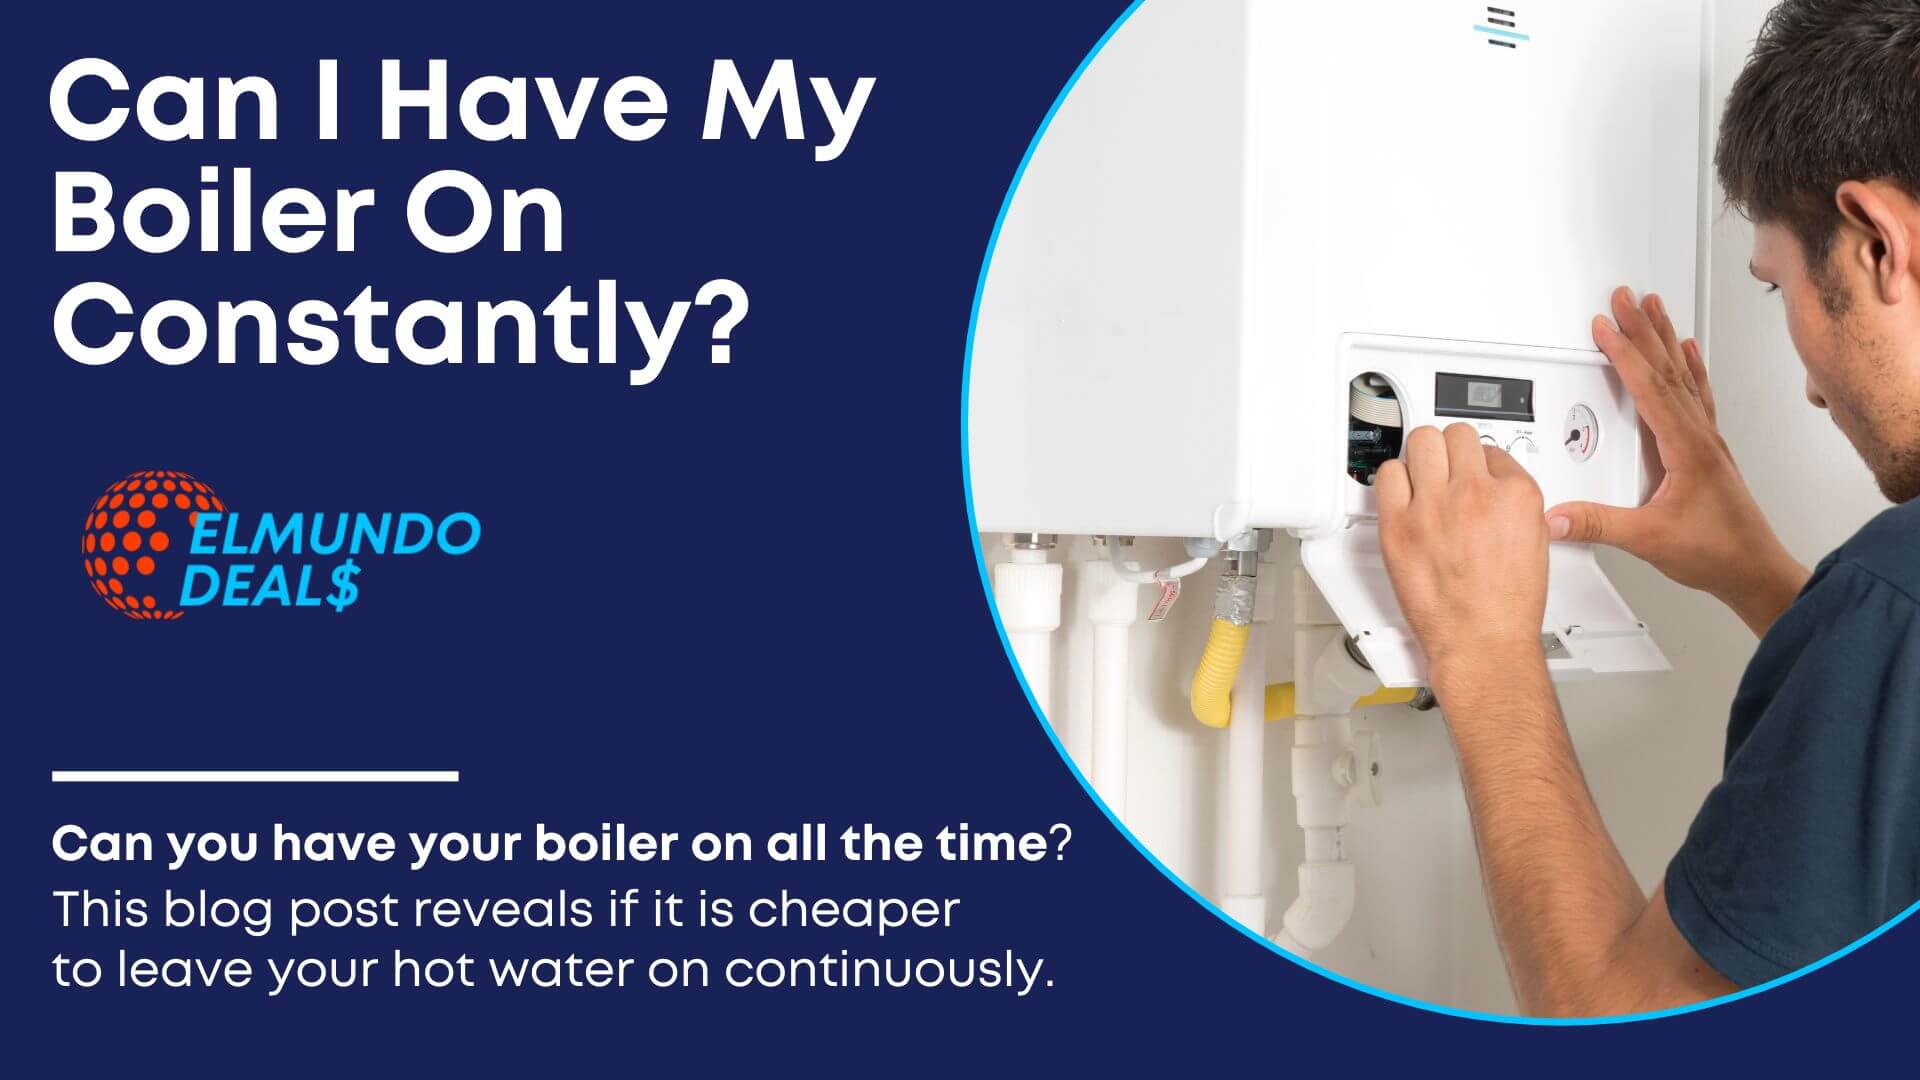 Can I have My Boiler On Continuously? - Is It Cheaper To Leave Hot Water On All The Time?